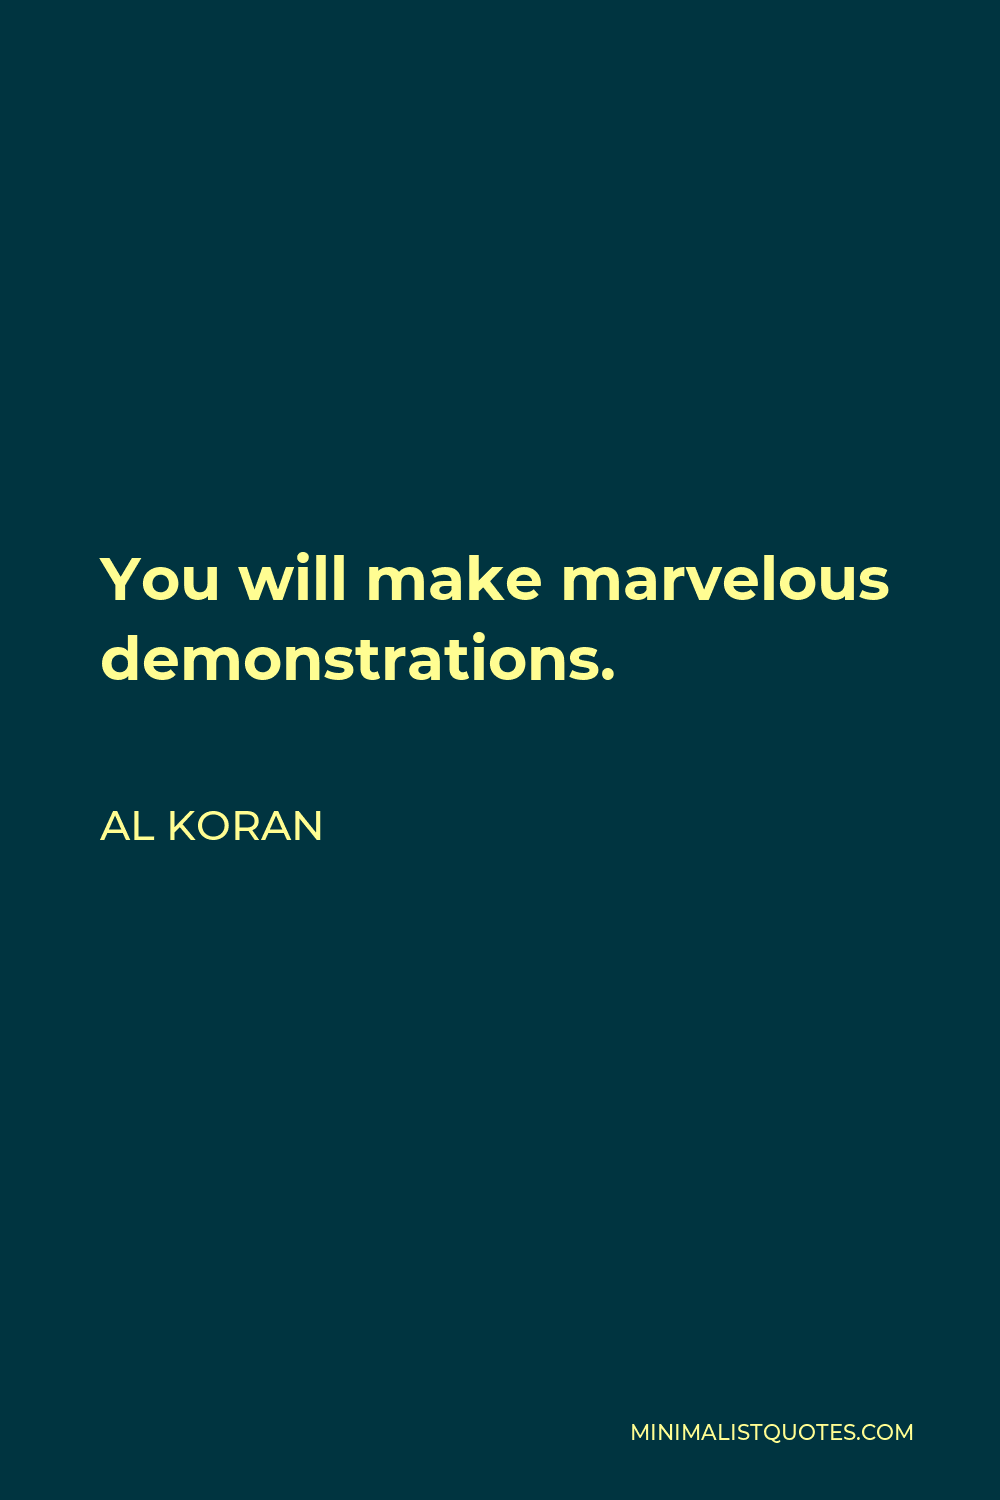 Al Koran Quote - You will make marvelous demonstrations.